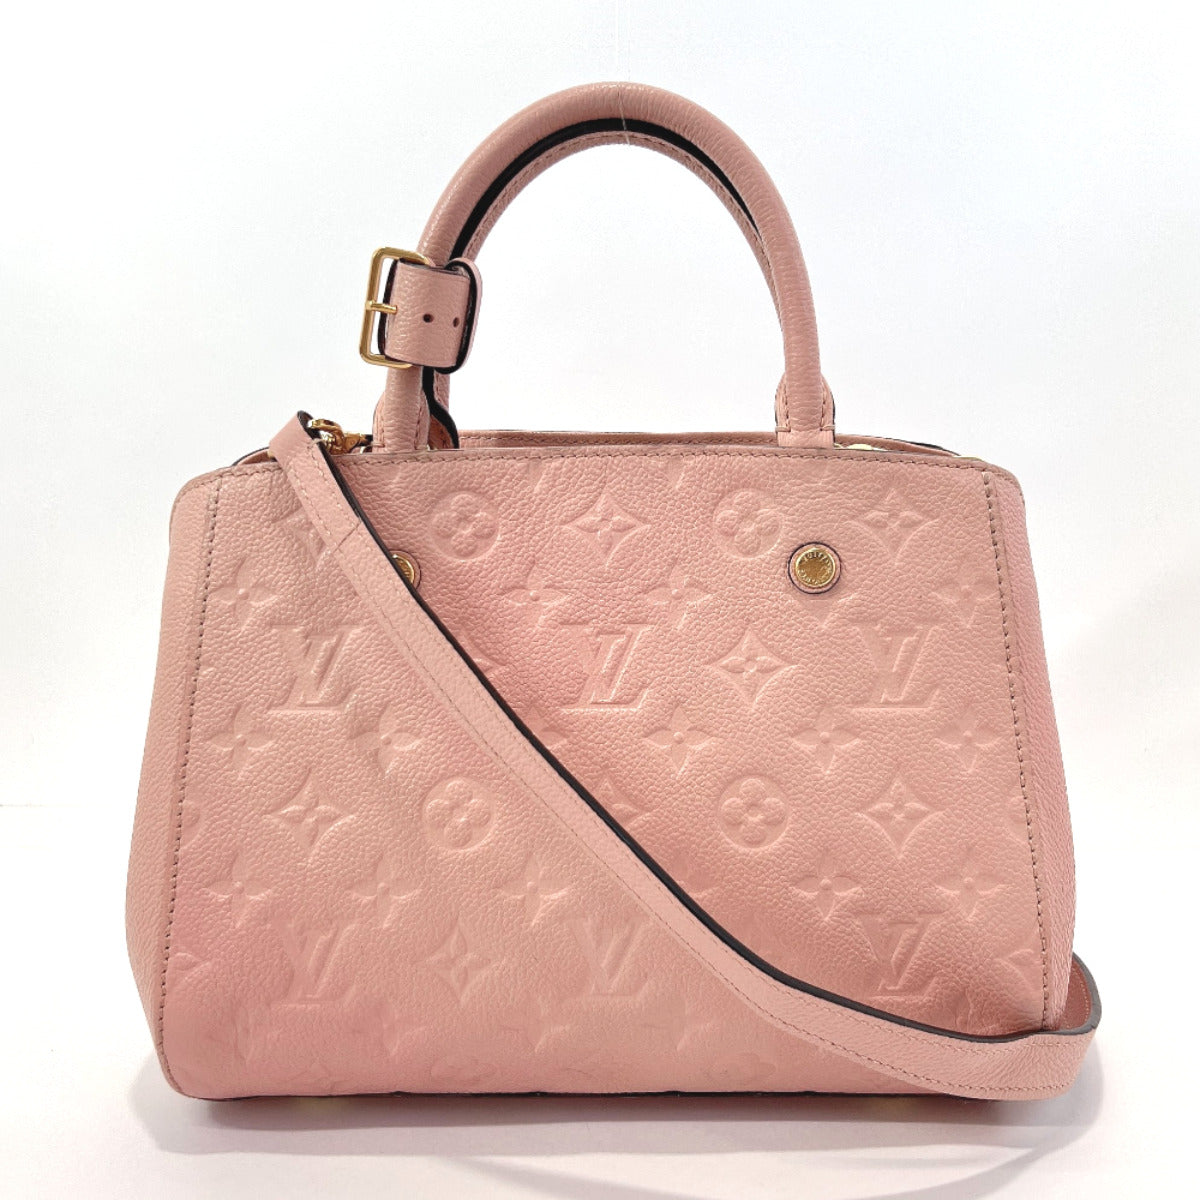 Women's Handbags - In Pink by Louis Vuitton in Pink color for